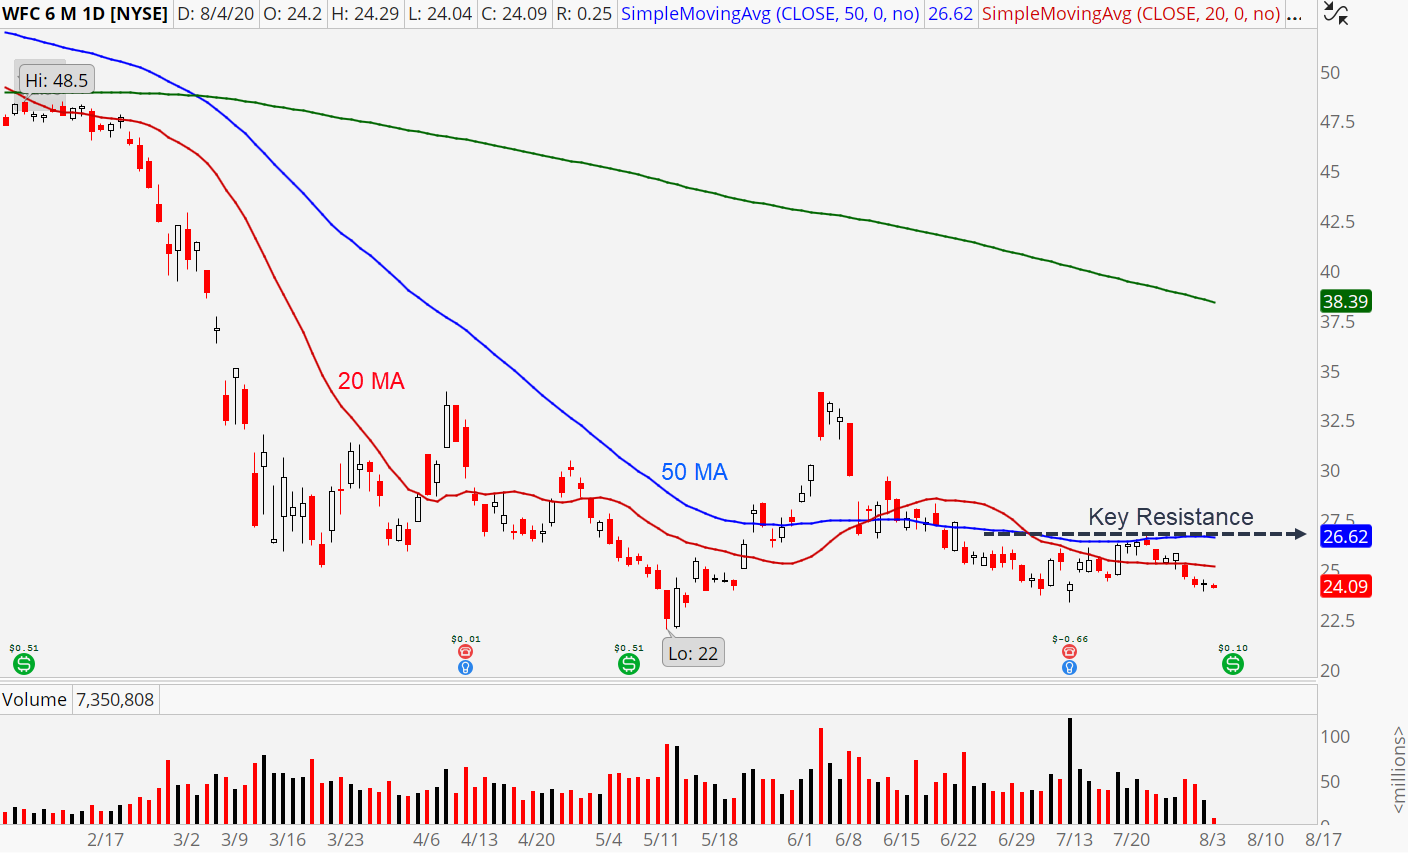 Wells Fargo (WFC) daily chart showing key resistance